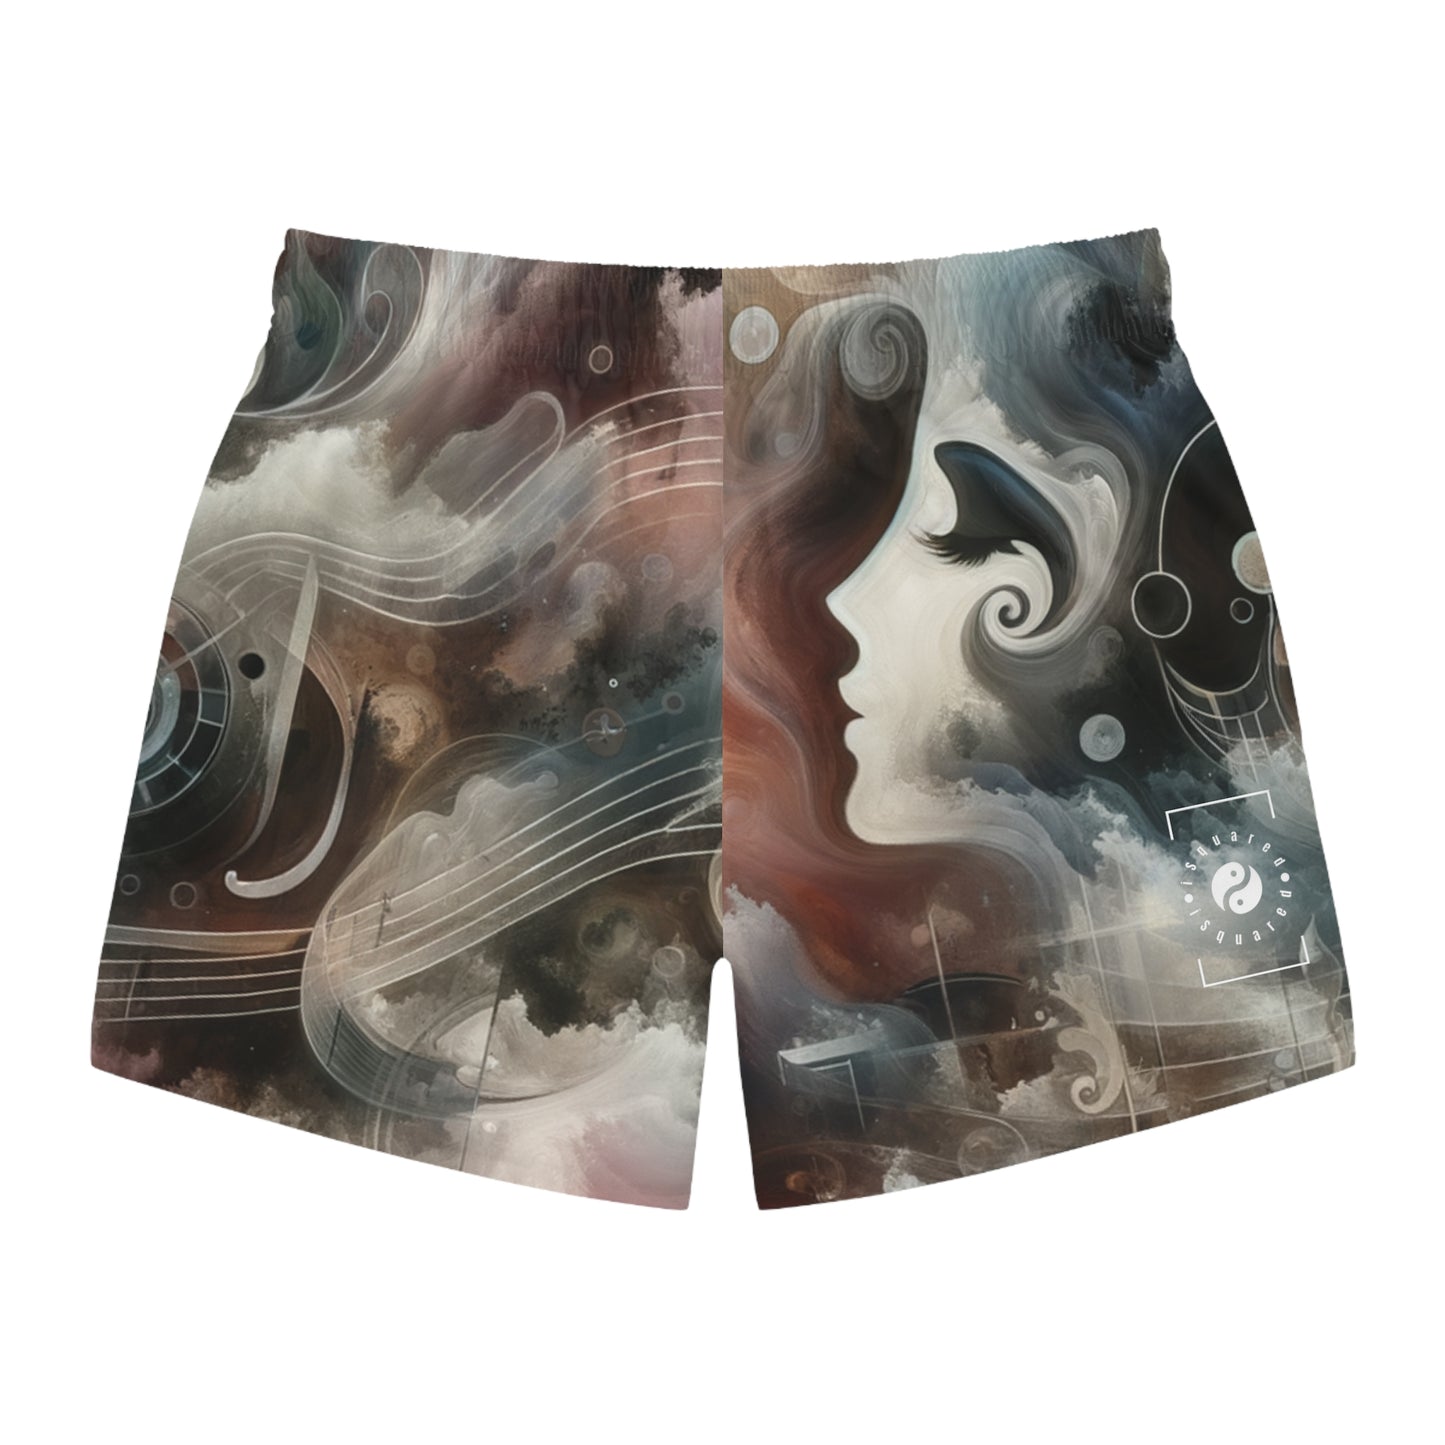 "Harmony of Descent: An Abstract Ode to La Traviata" - Swim Trunks for Men